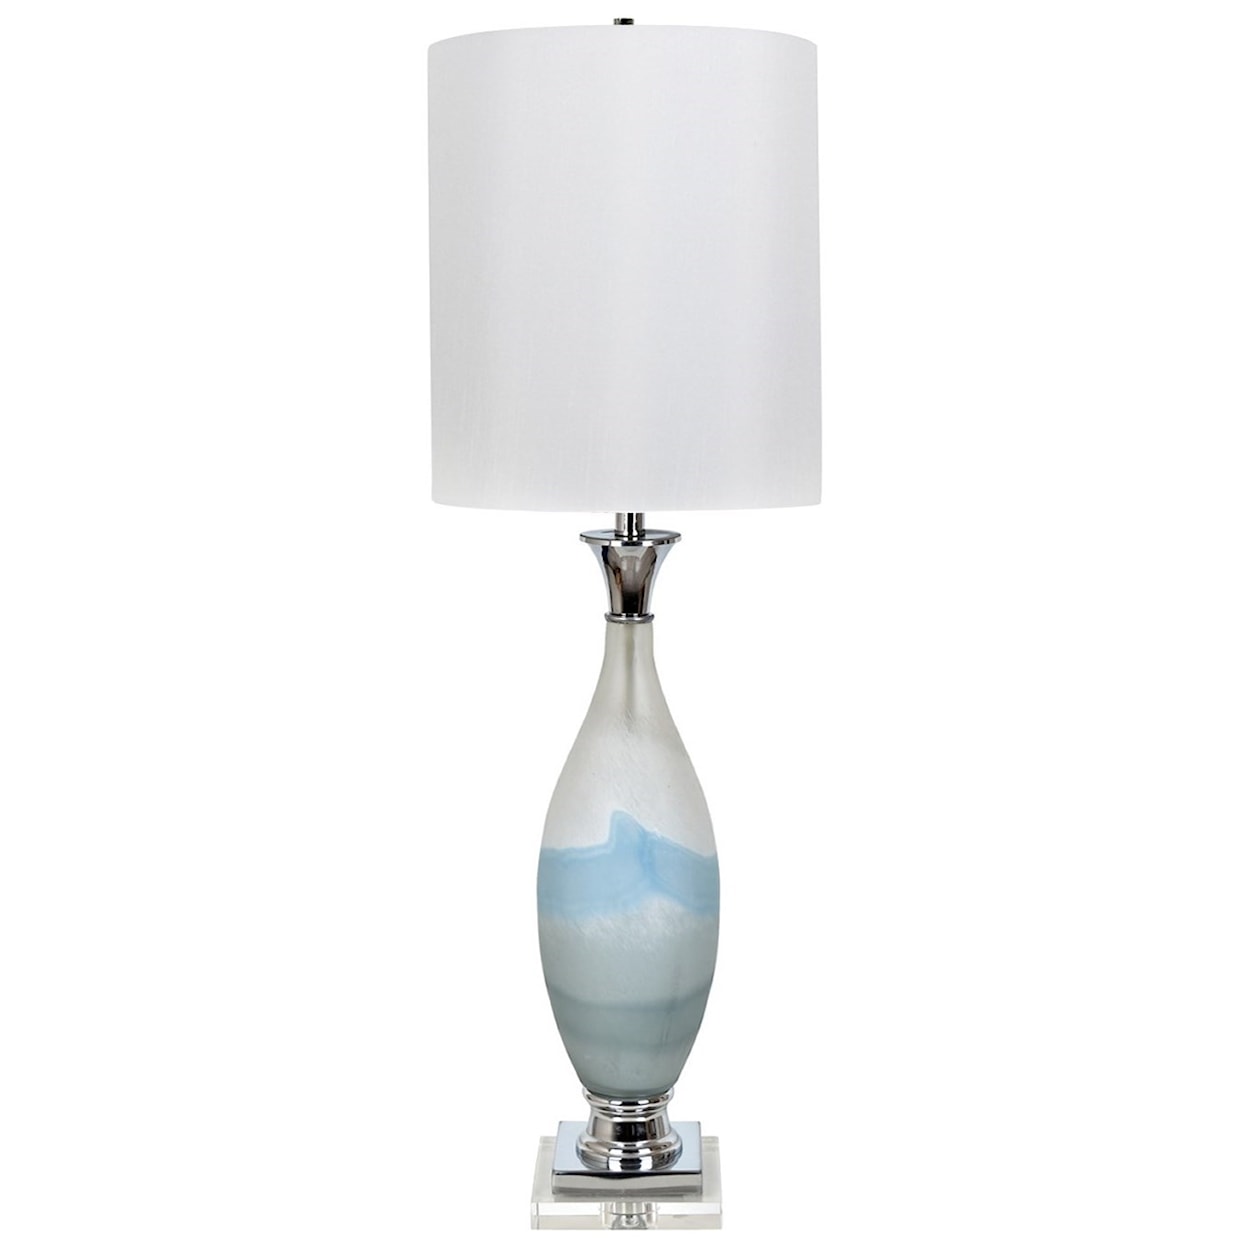 Crestview Collection Lighting Evelyn Table Lamp